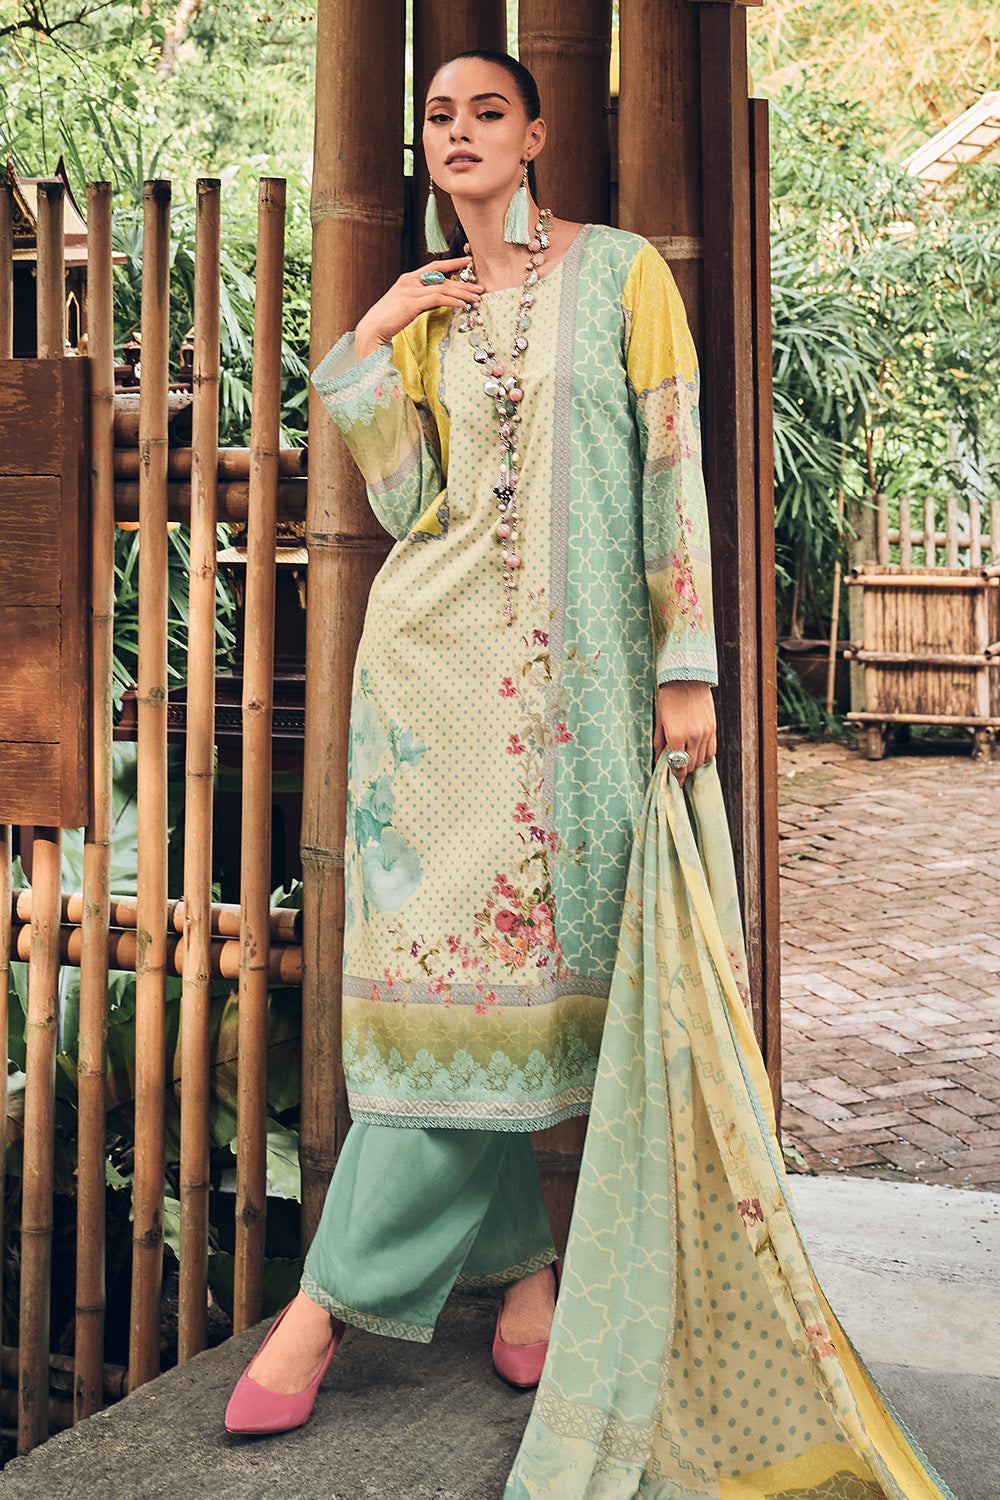 Sea Green Color Cotton Printed Unstitched Suit Material